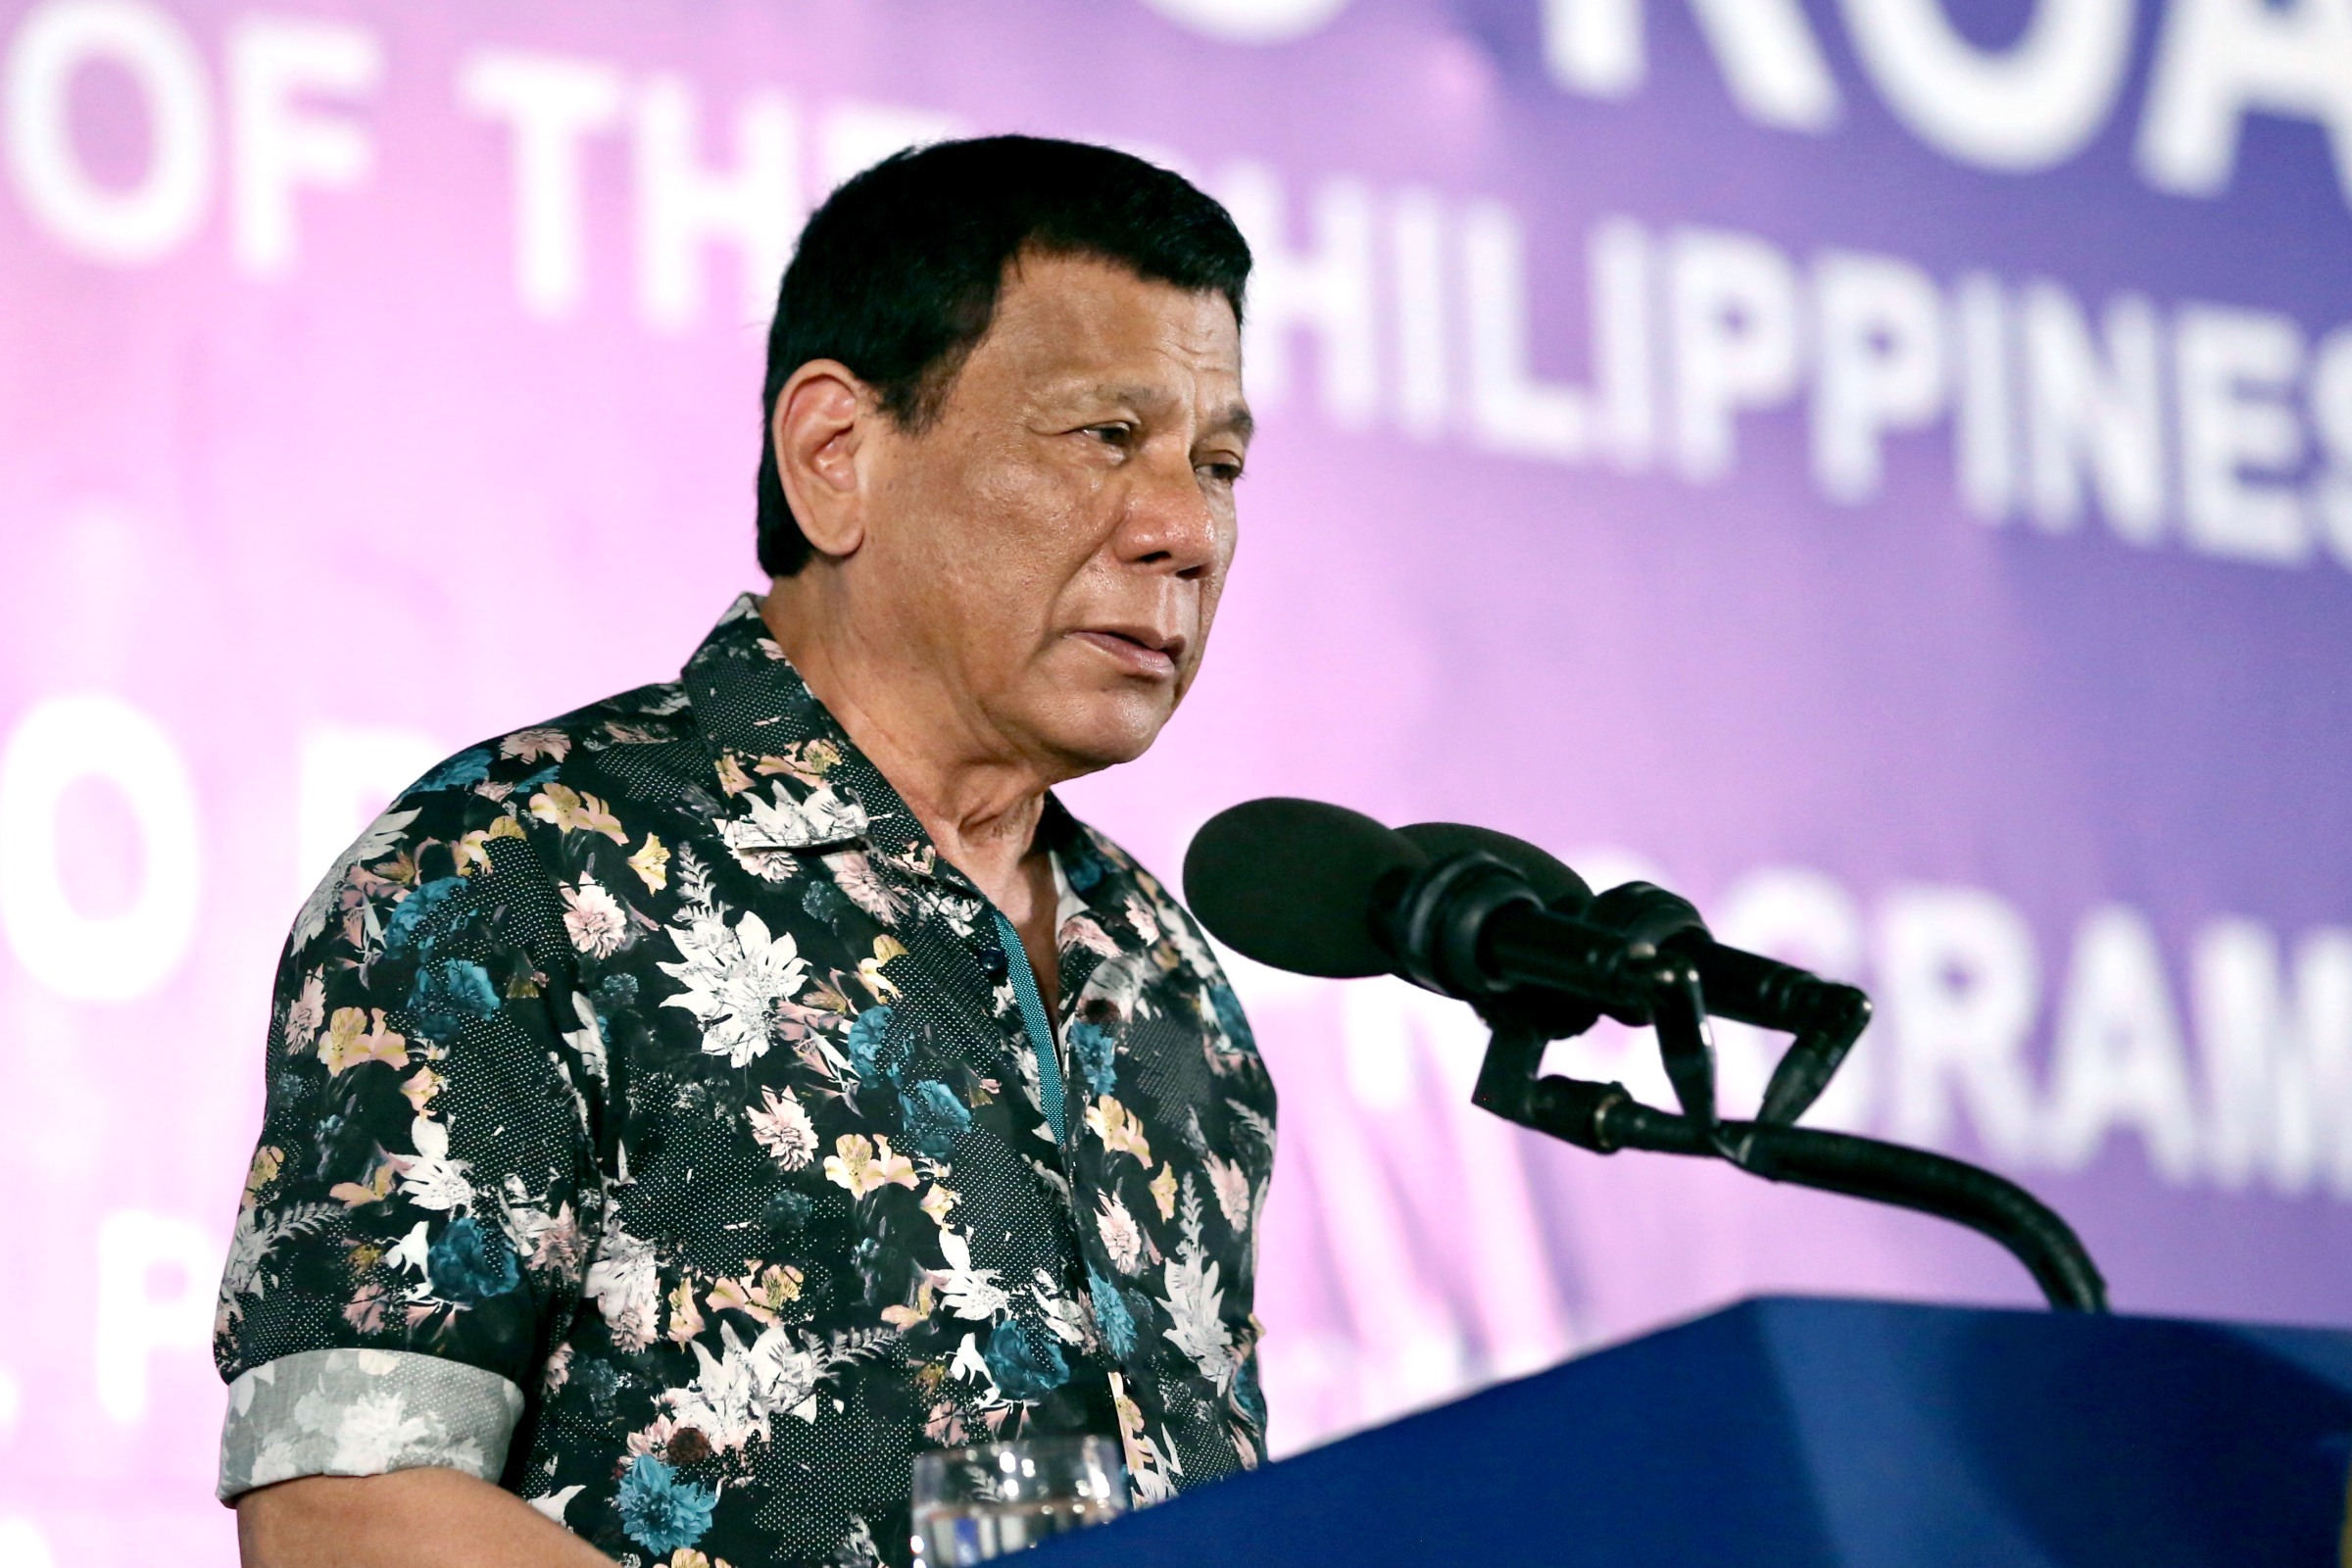 Palace: Duterte has nothing to do with shutdown Facebook accounts